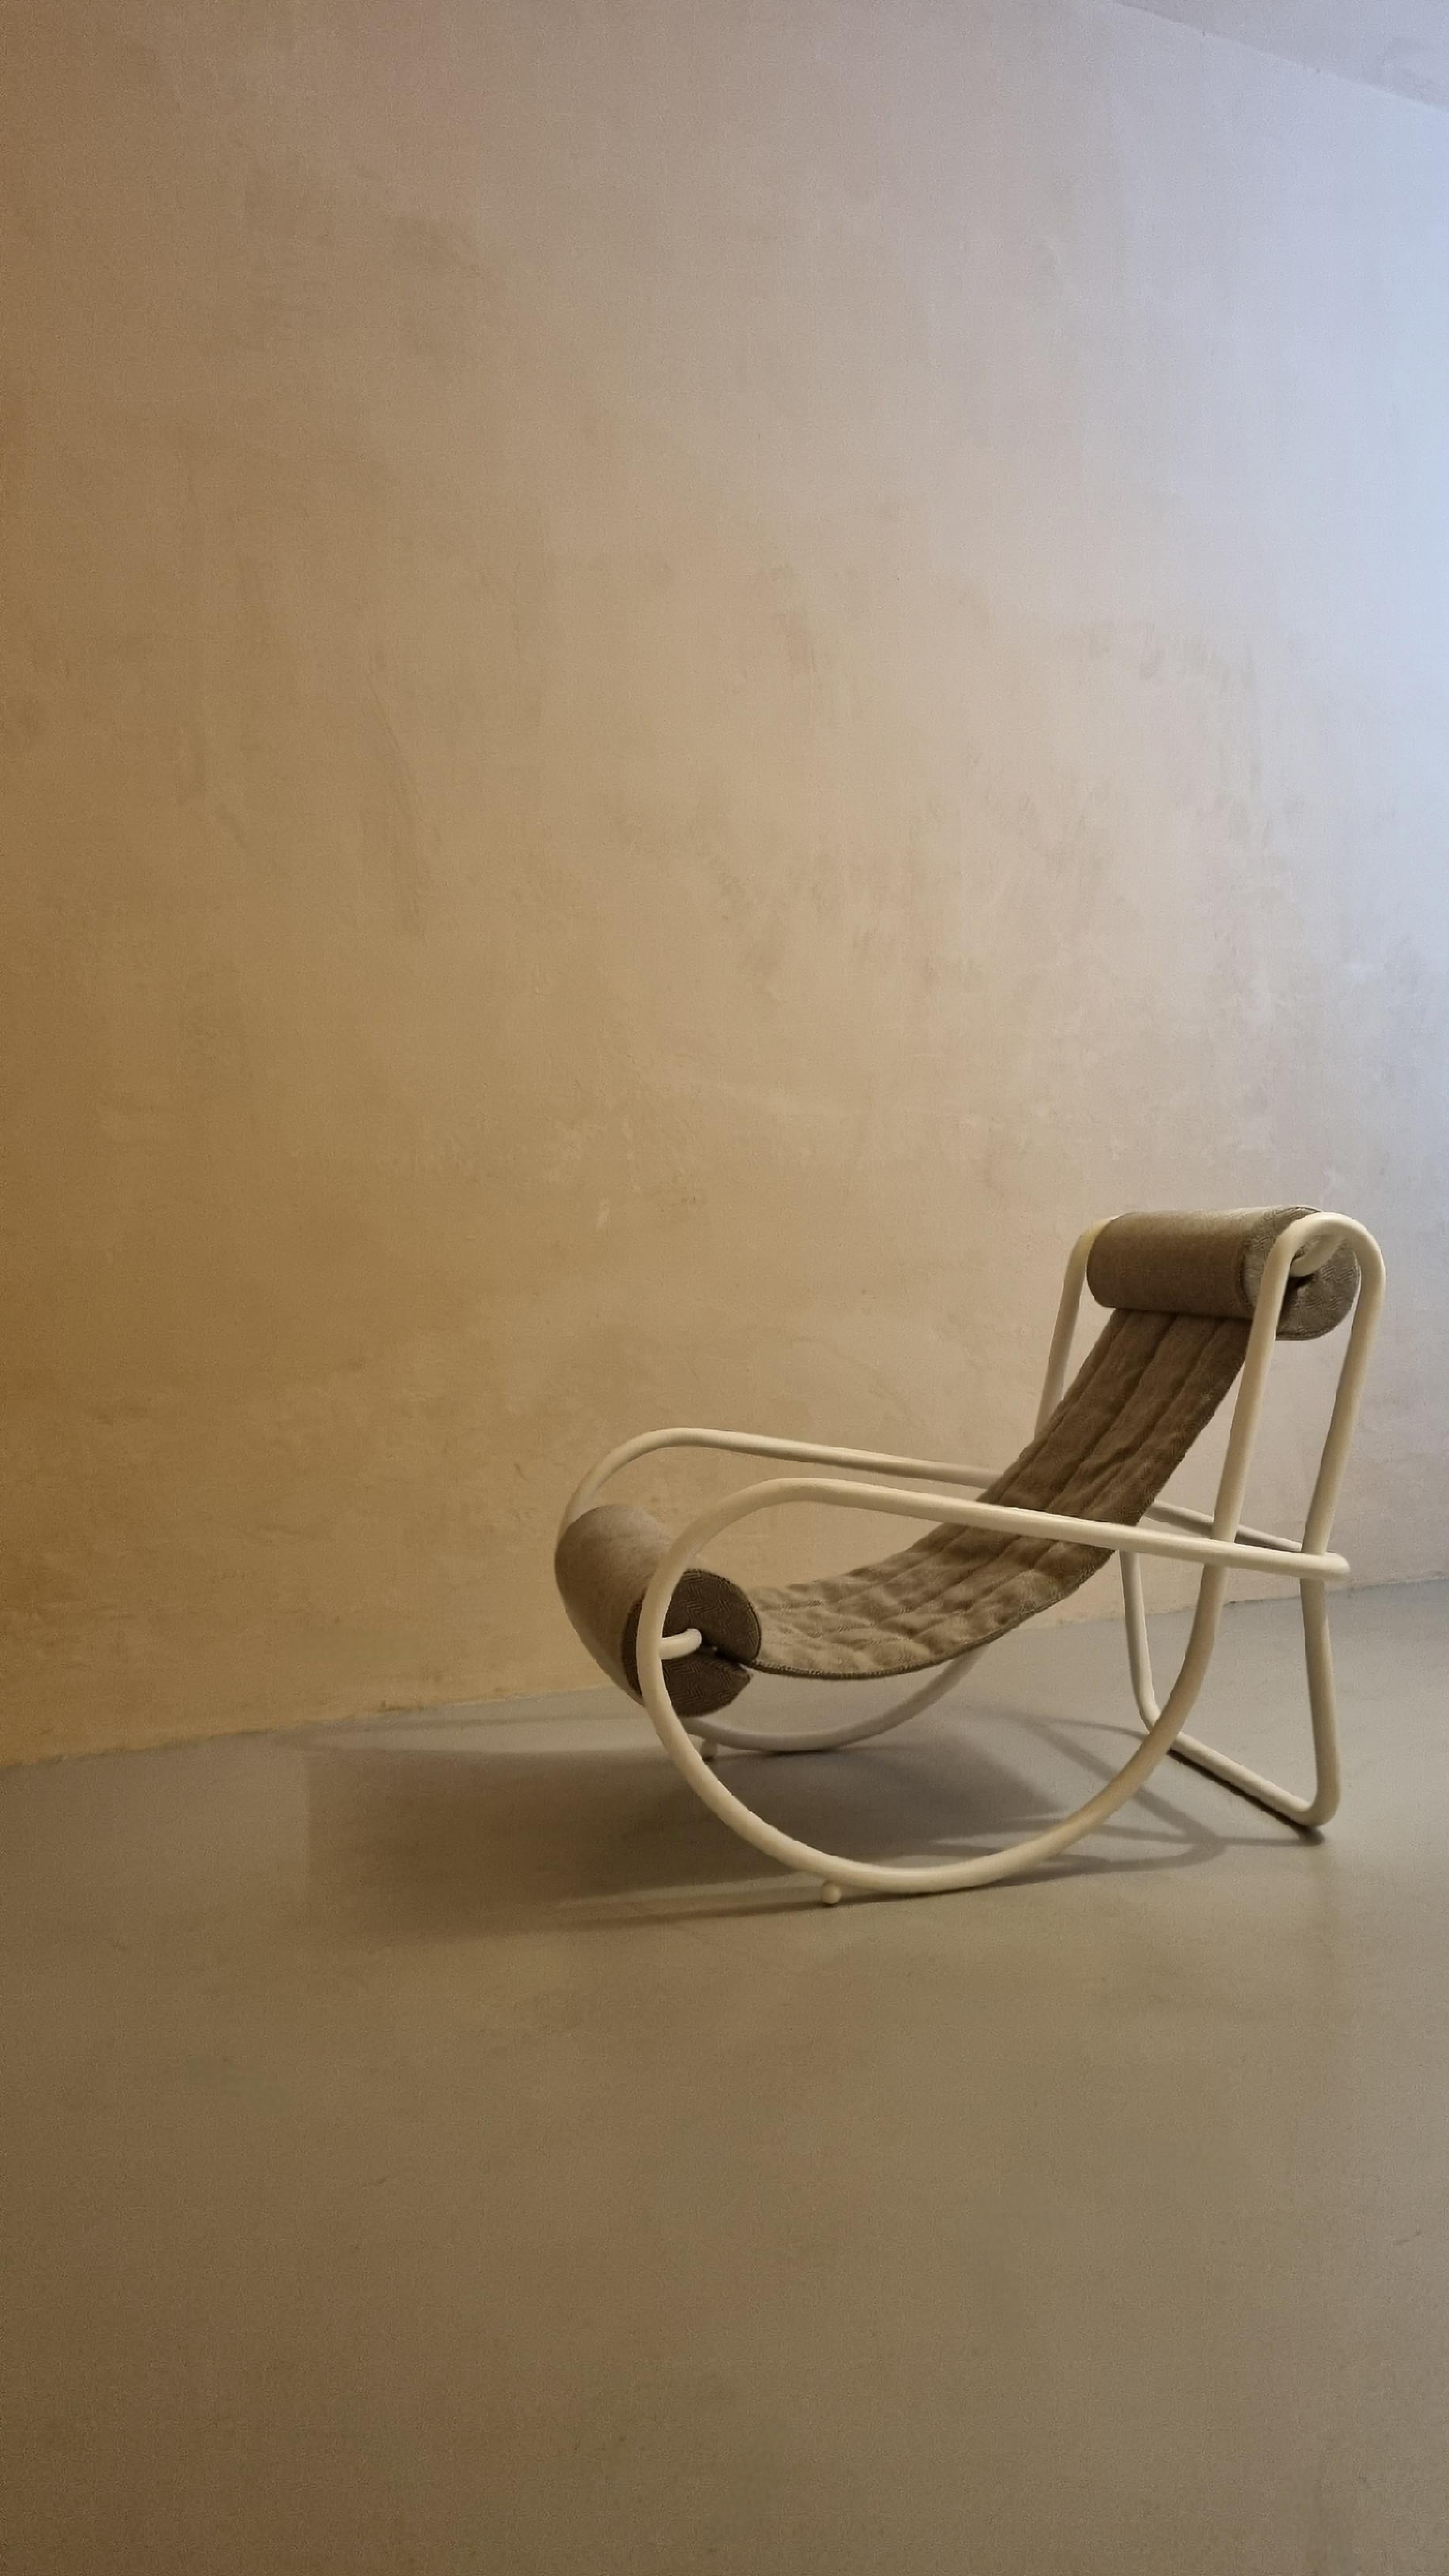 Locus Solus armchair designed by Gae Aulenti for Poltronova 1964.
A first production in excellent condition, restored.
Structure in painted metal, linen, polyurethane padding.
A few years after the publication of the book by Raymond Roussel, Gae